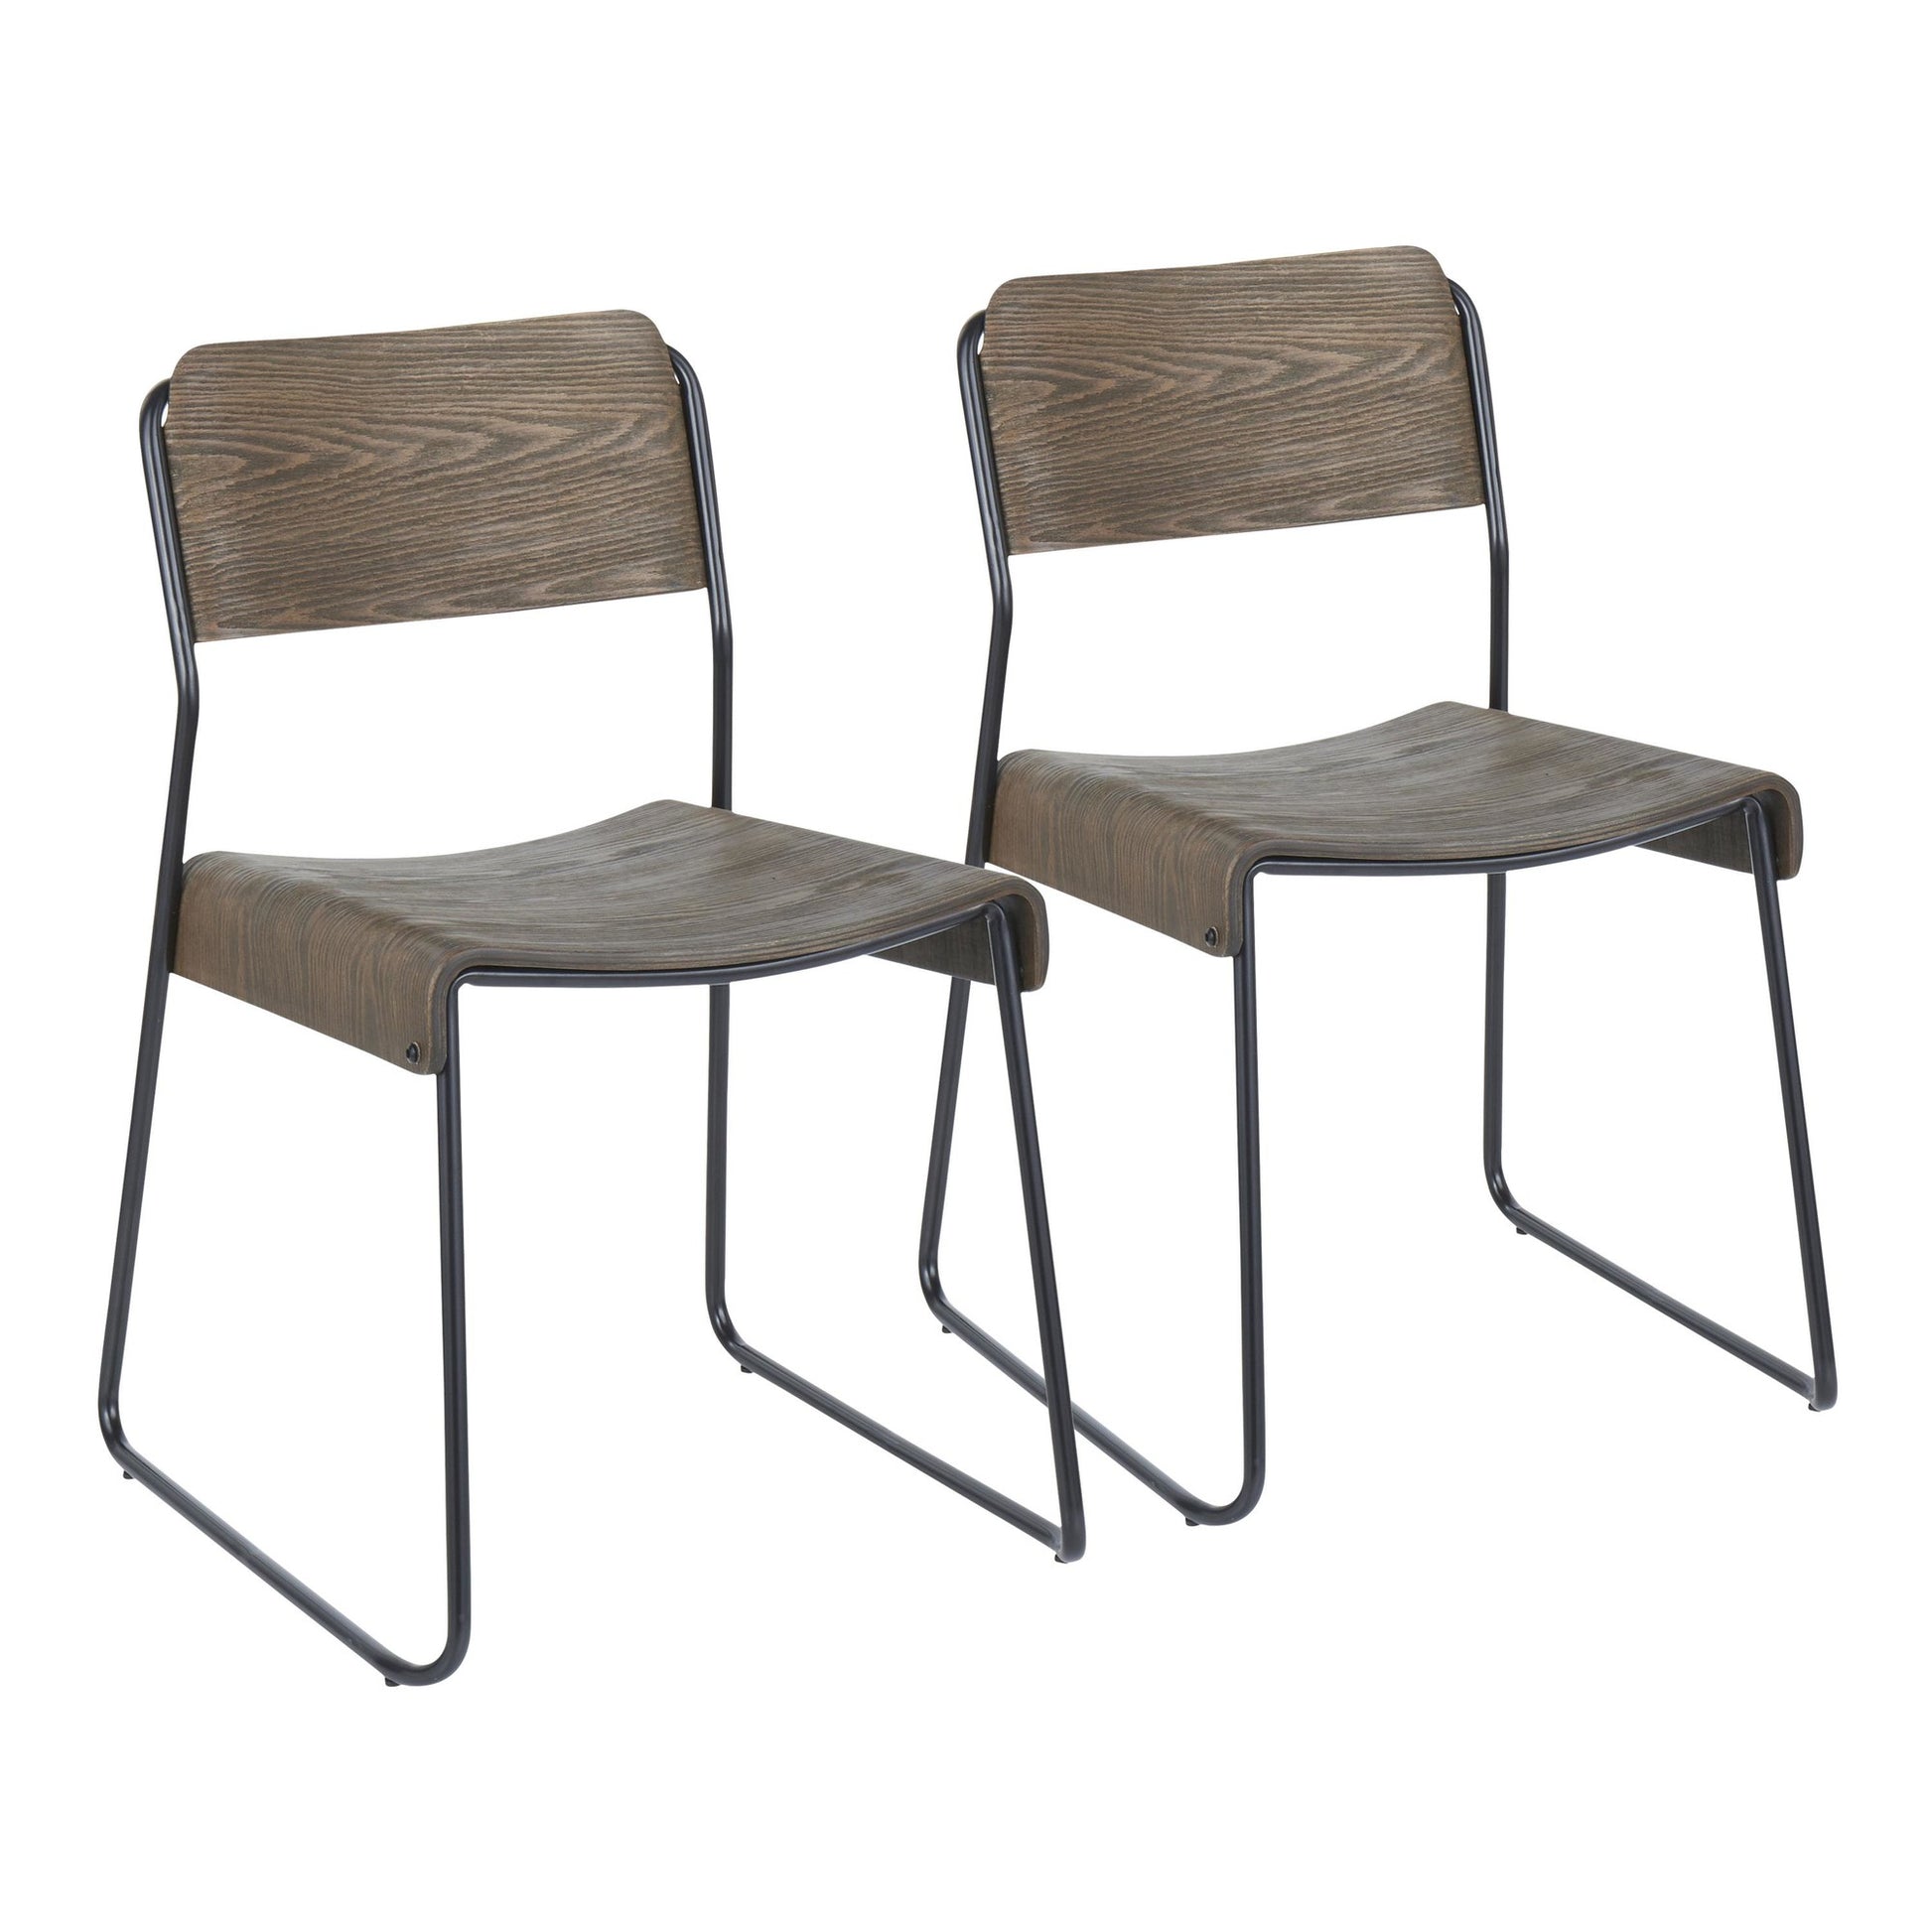 LumiSource Dali Industrial Chair - Set of 2-2